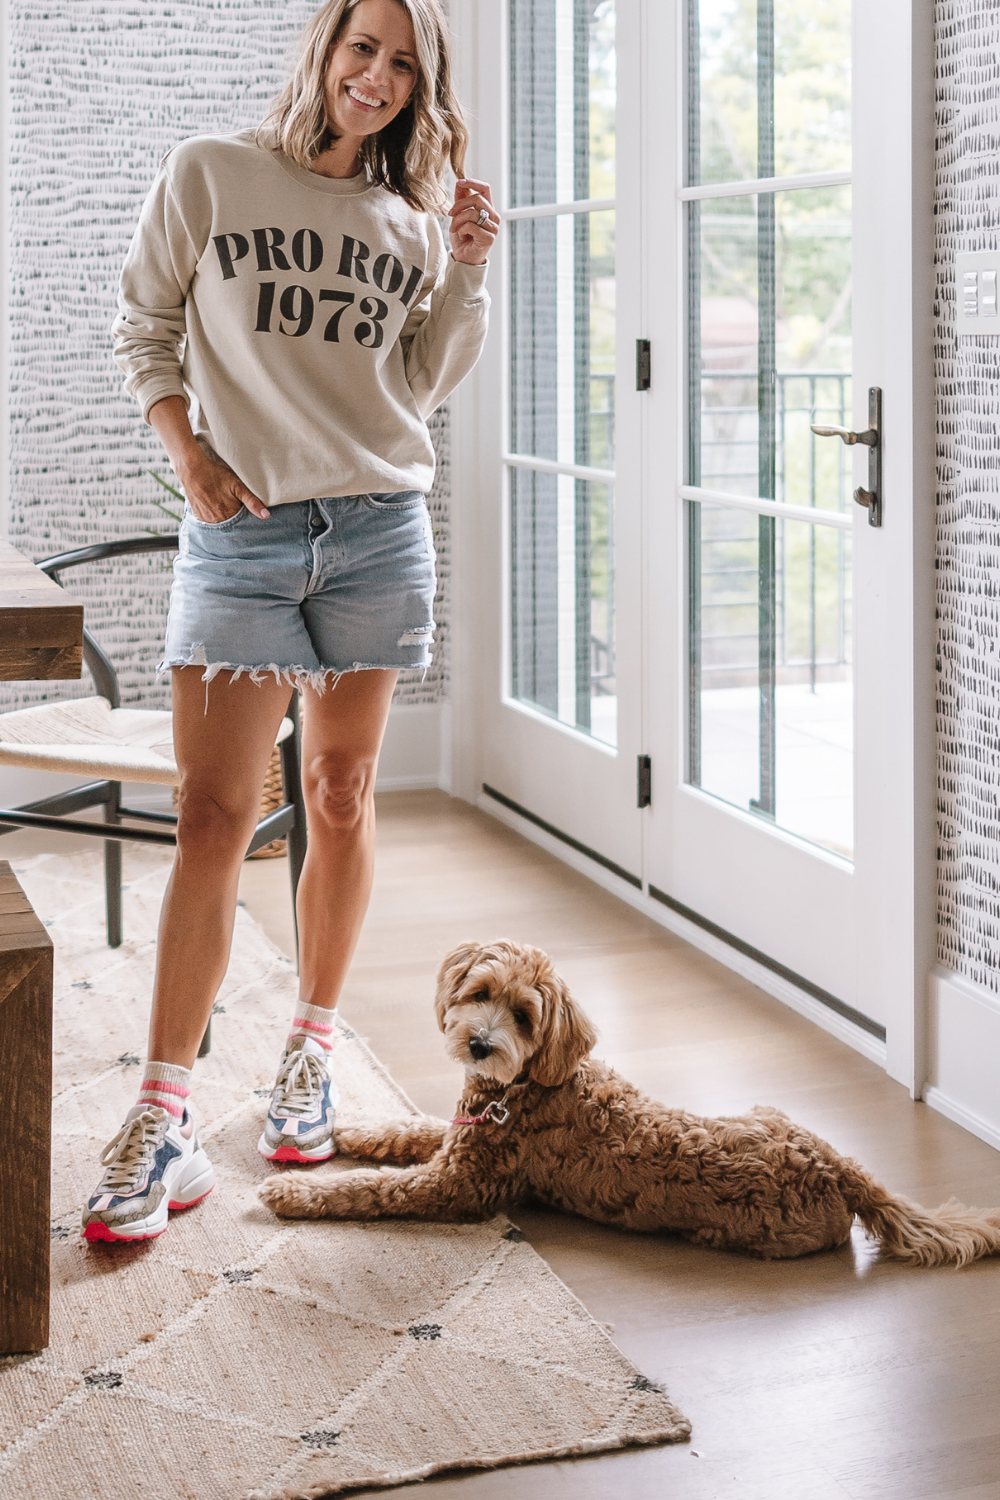 Suzanne wearing a "Pro Roe" sweatshirt in the kitchen nook with her dog, Georgia 